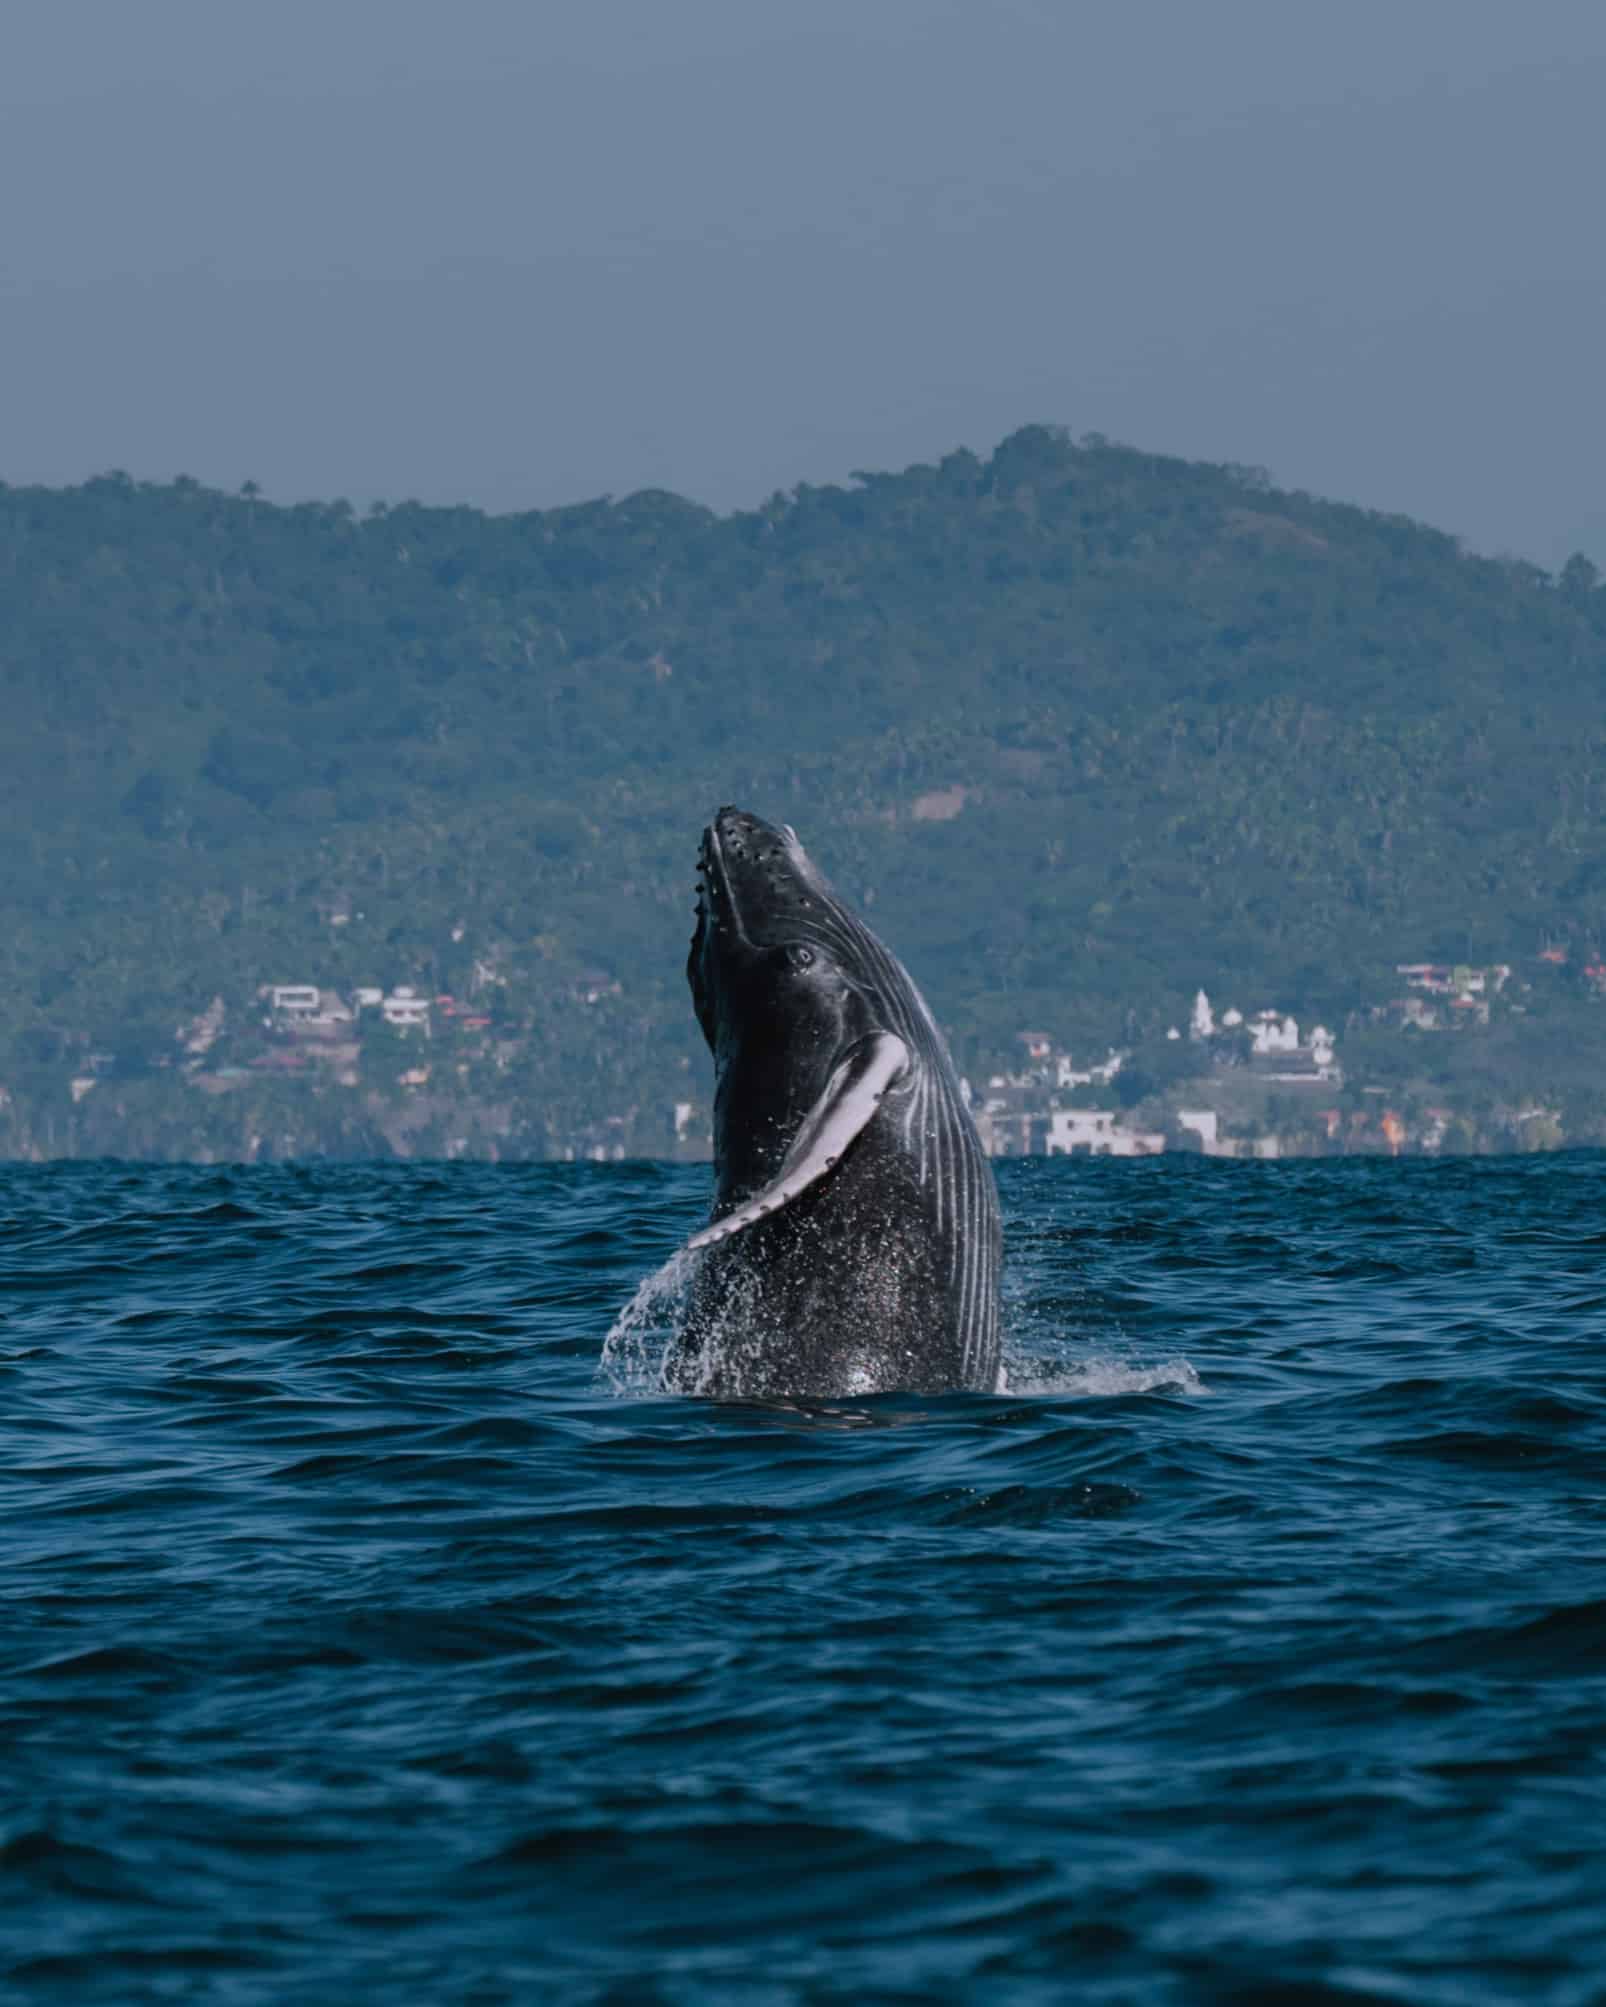 A humpback whale jumping out of the water in Sayulita.